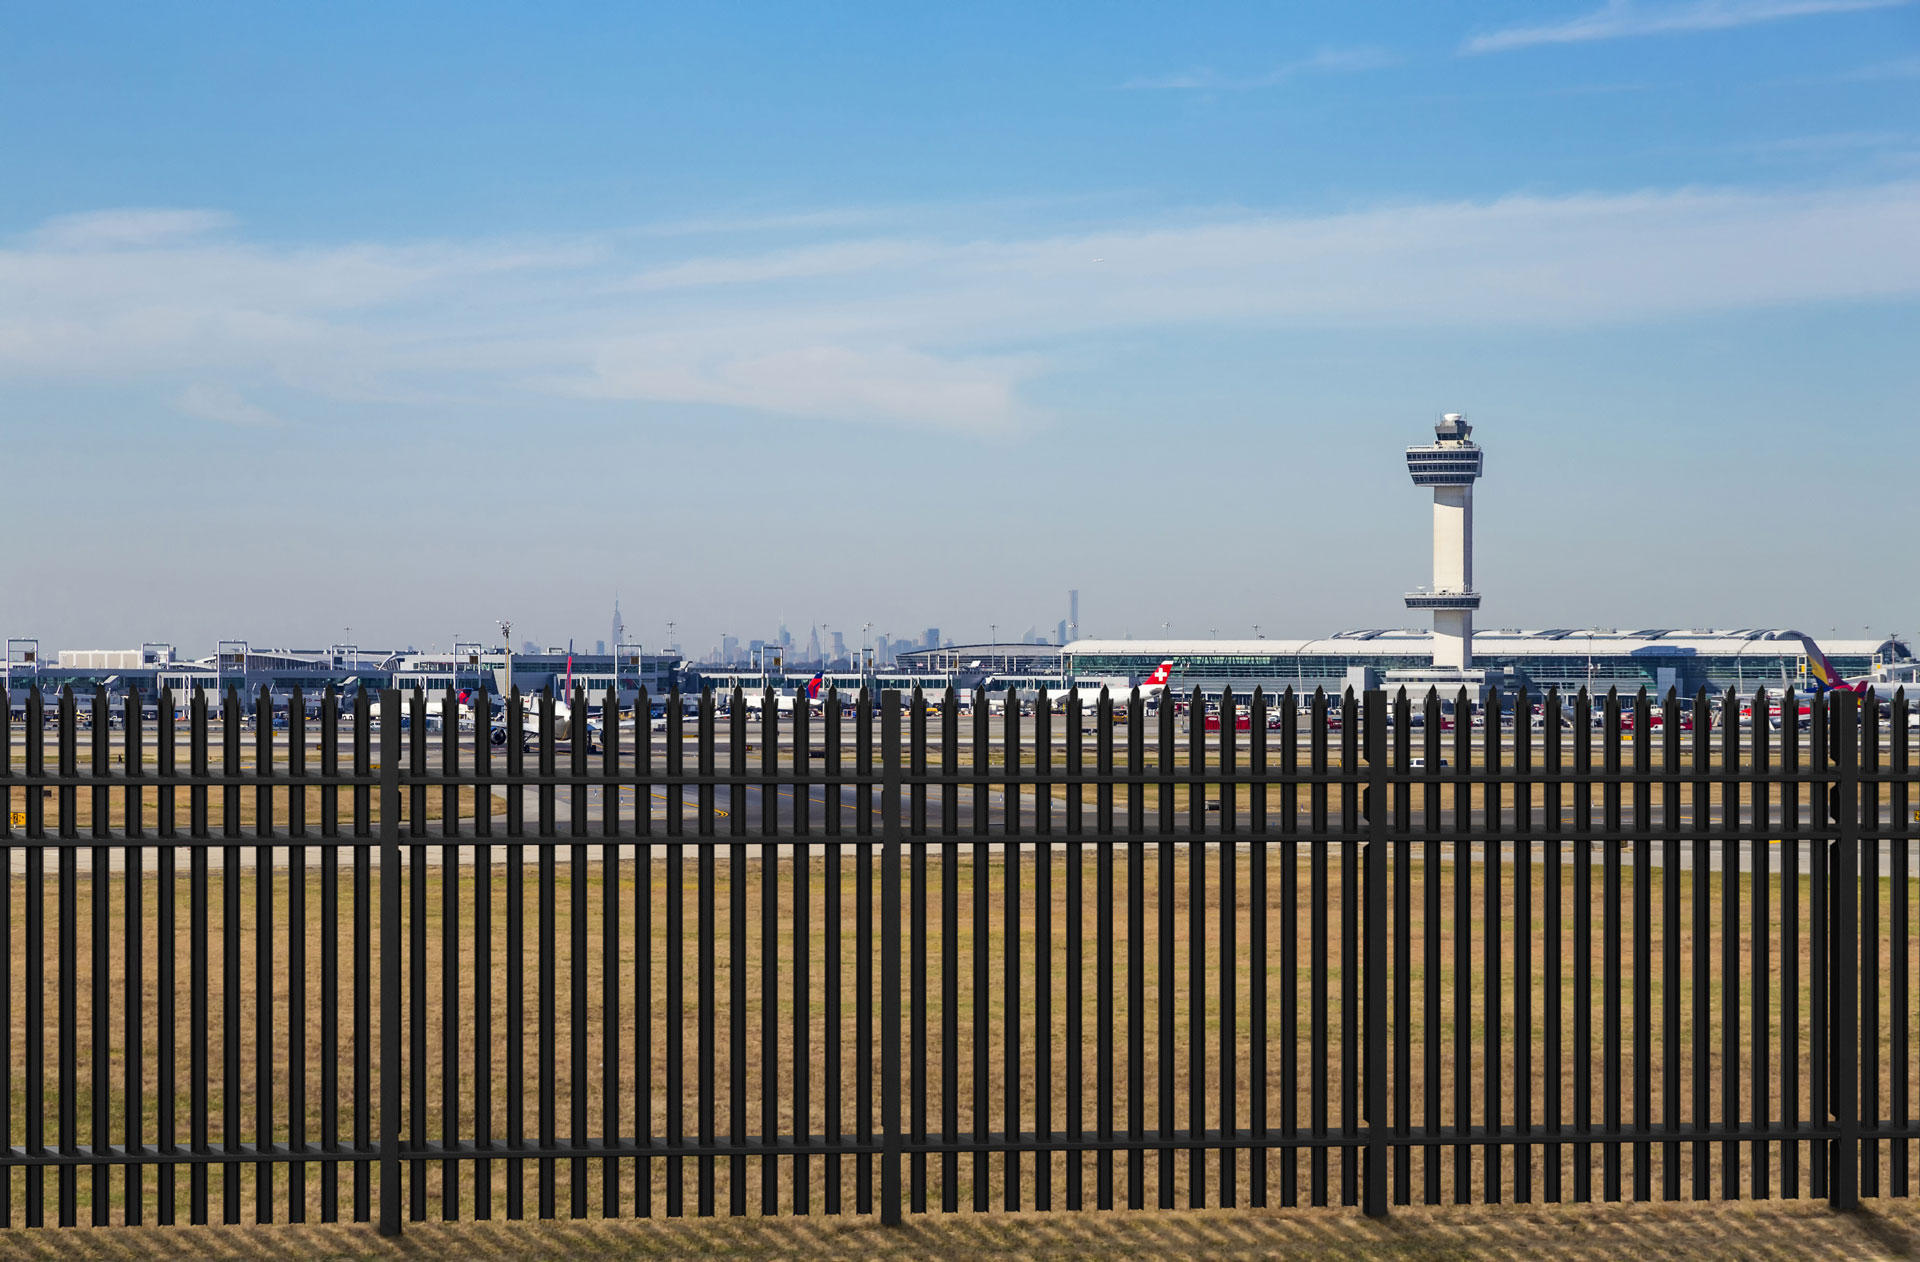 Durable high-security steel fencing at an airport, safeguarding against unauthorized access with a view of the control tower. 